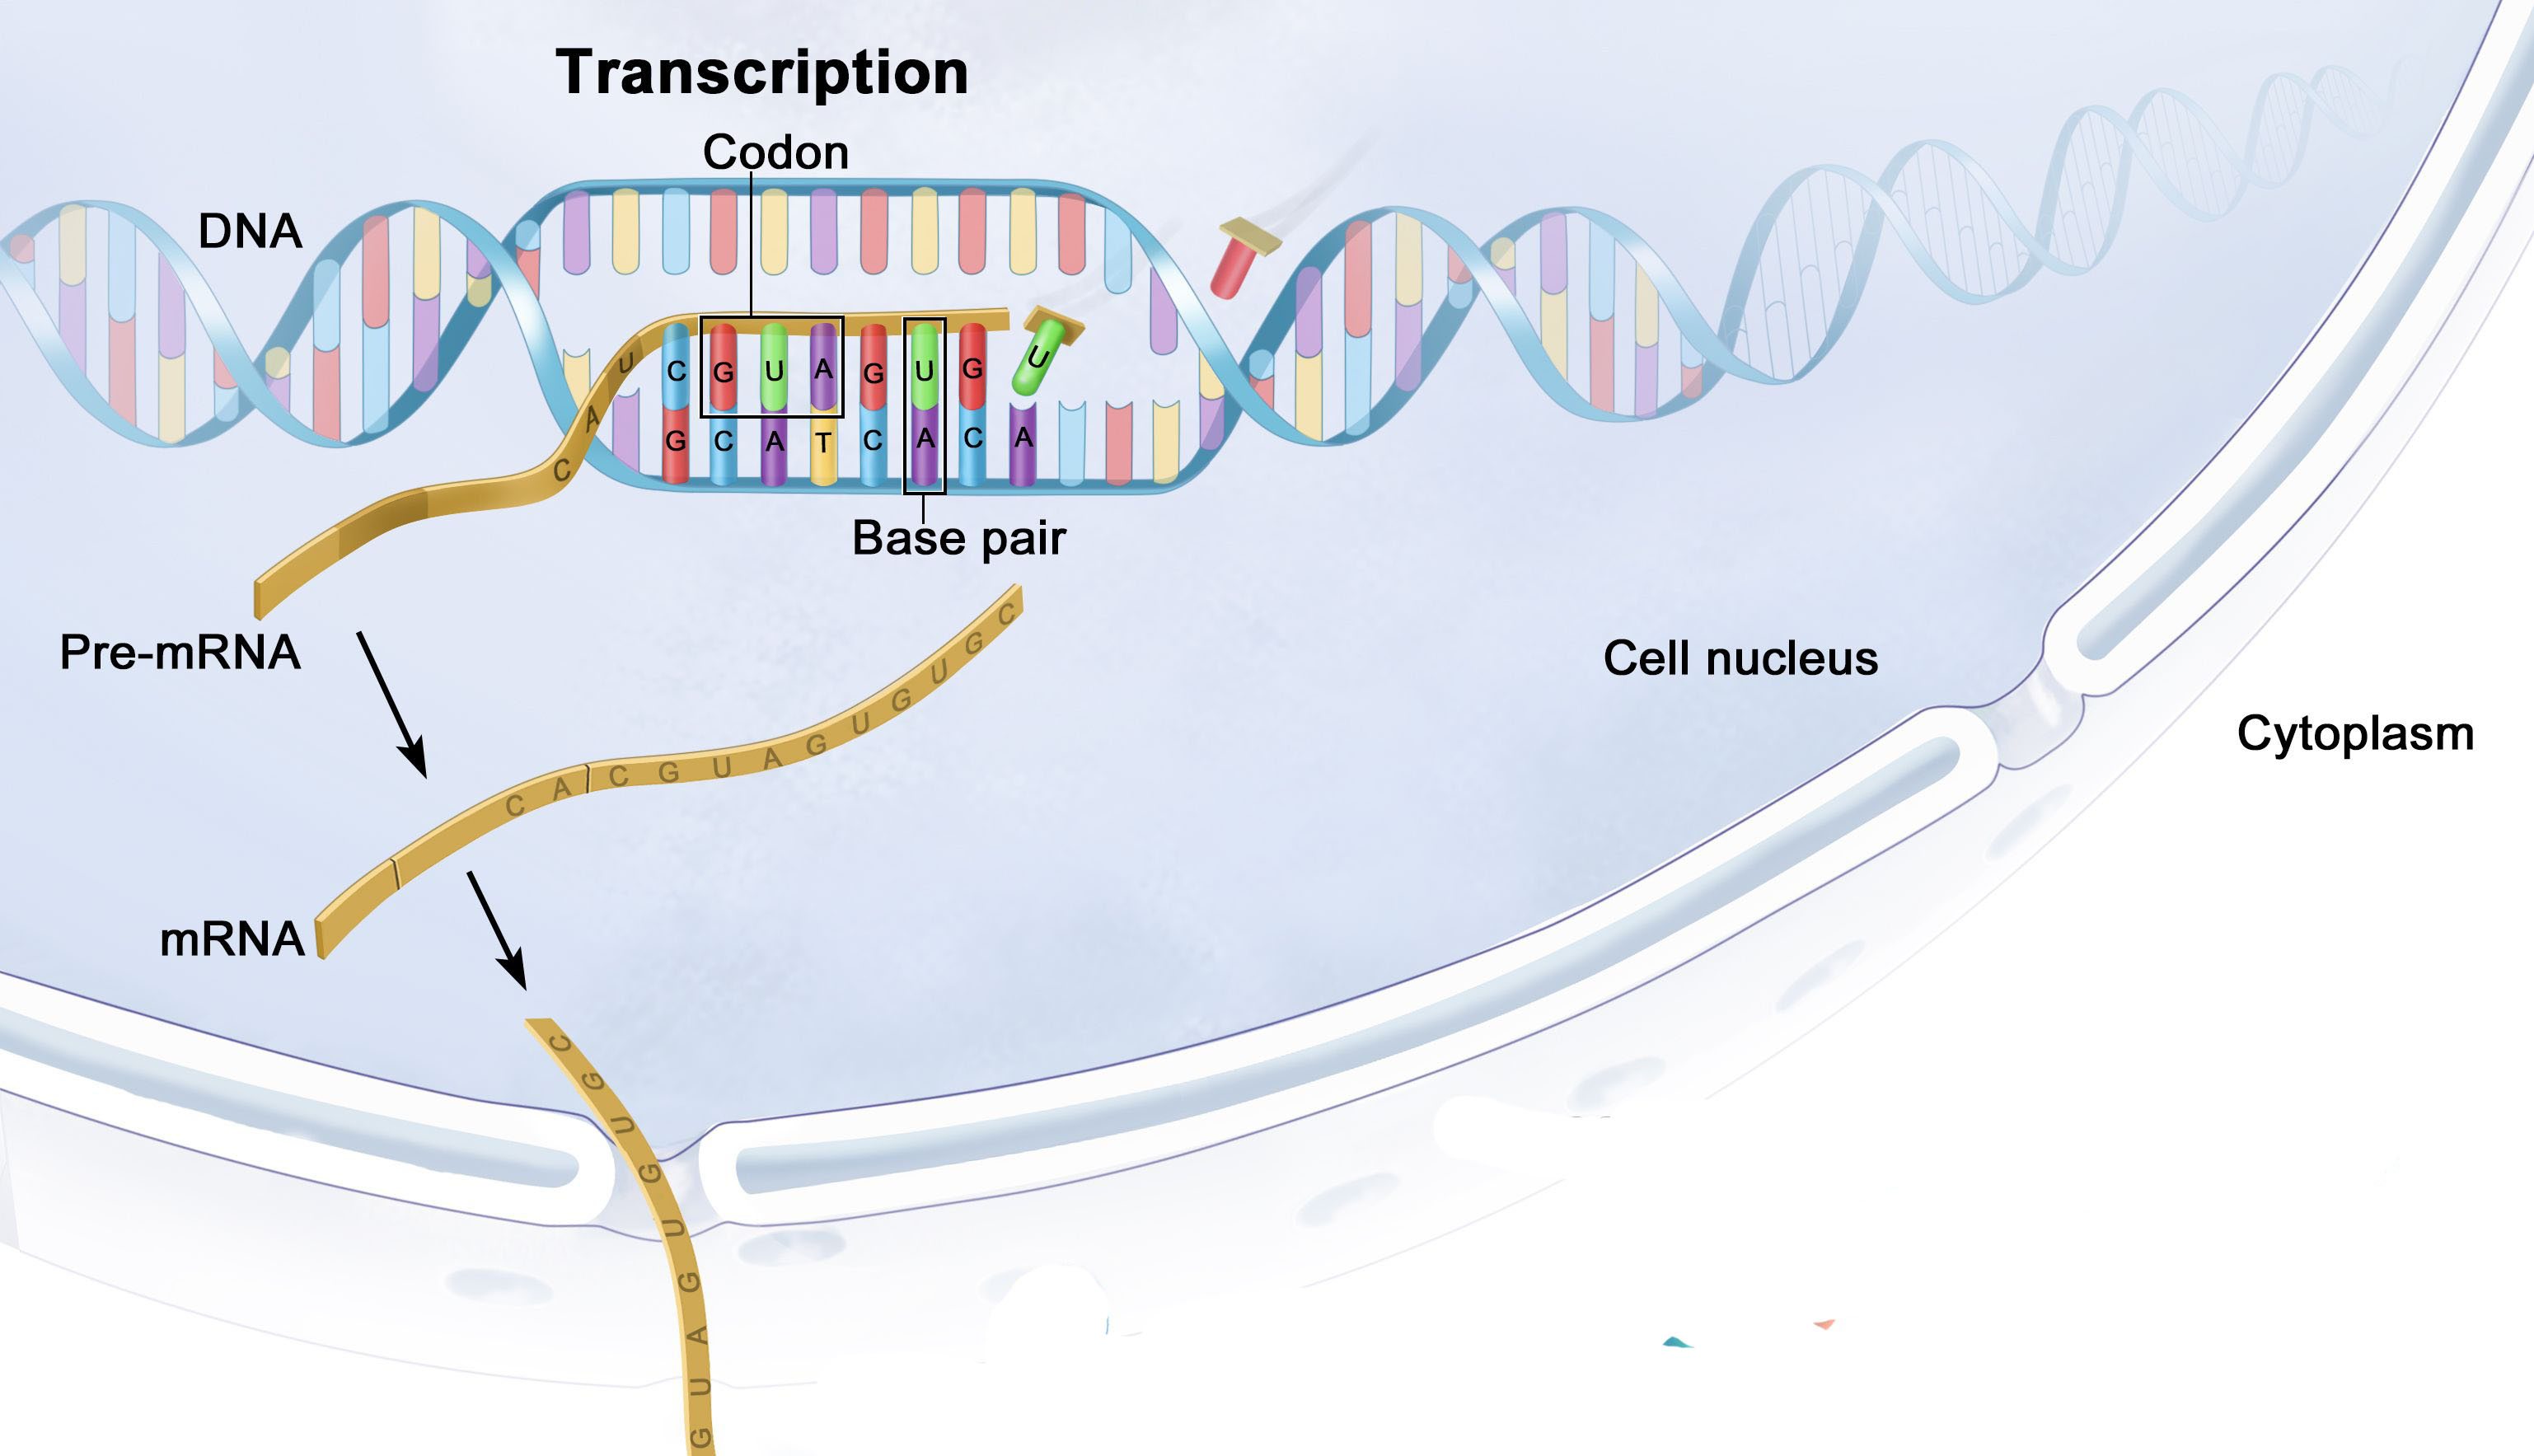 This image illustrates the process of gene transcription, where the genetic information in DNA is copied into RNA